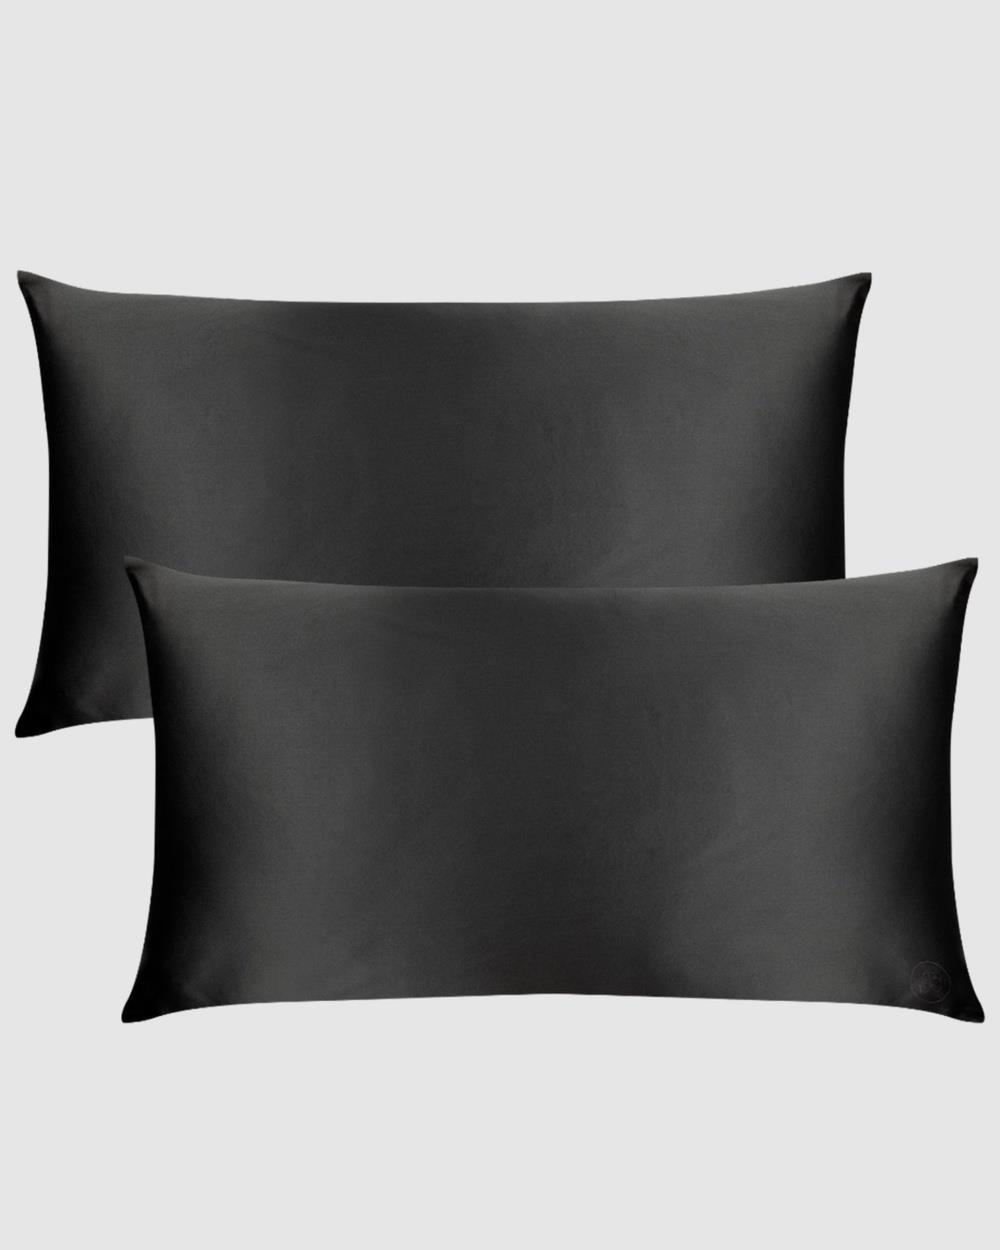 The Goodnight Co. - King Size Twin Set Silk Pillowcase - Sleep (Charcoal) King Size Twin Set Silk Pillowcase